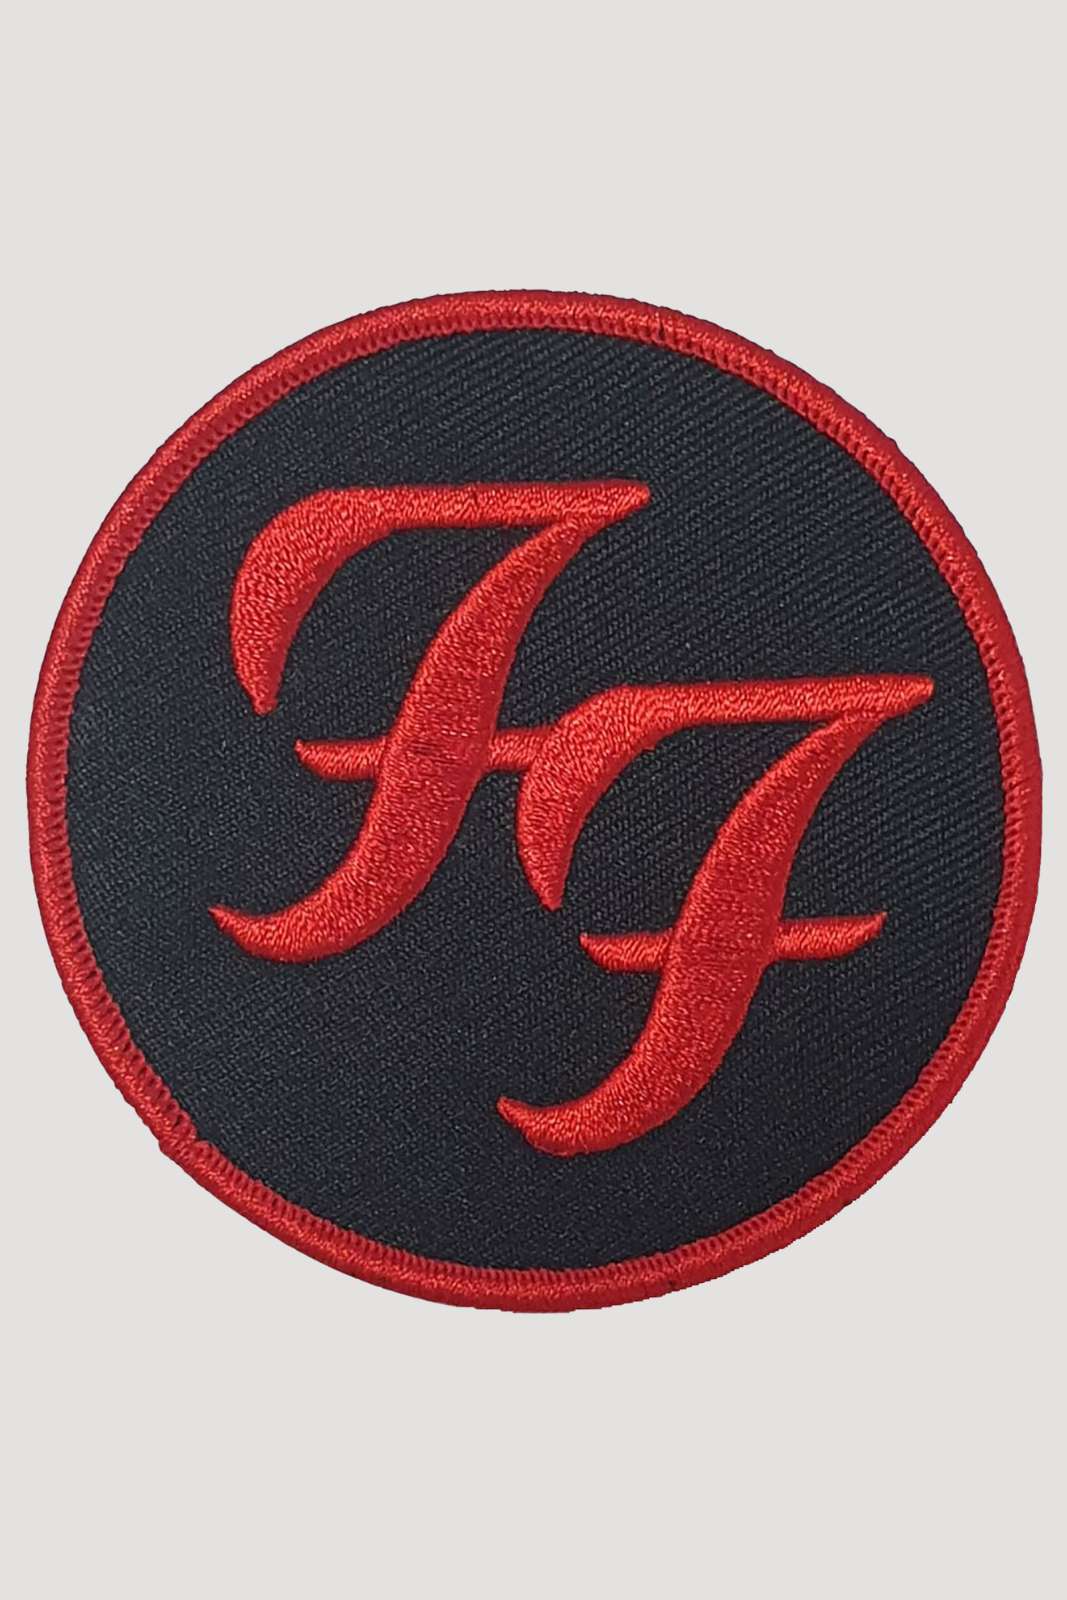 Foo Fighters Circle Logo Patch